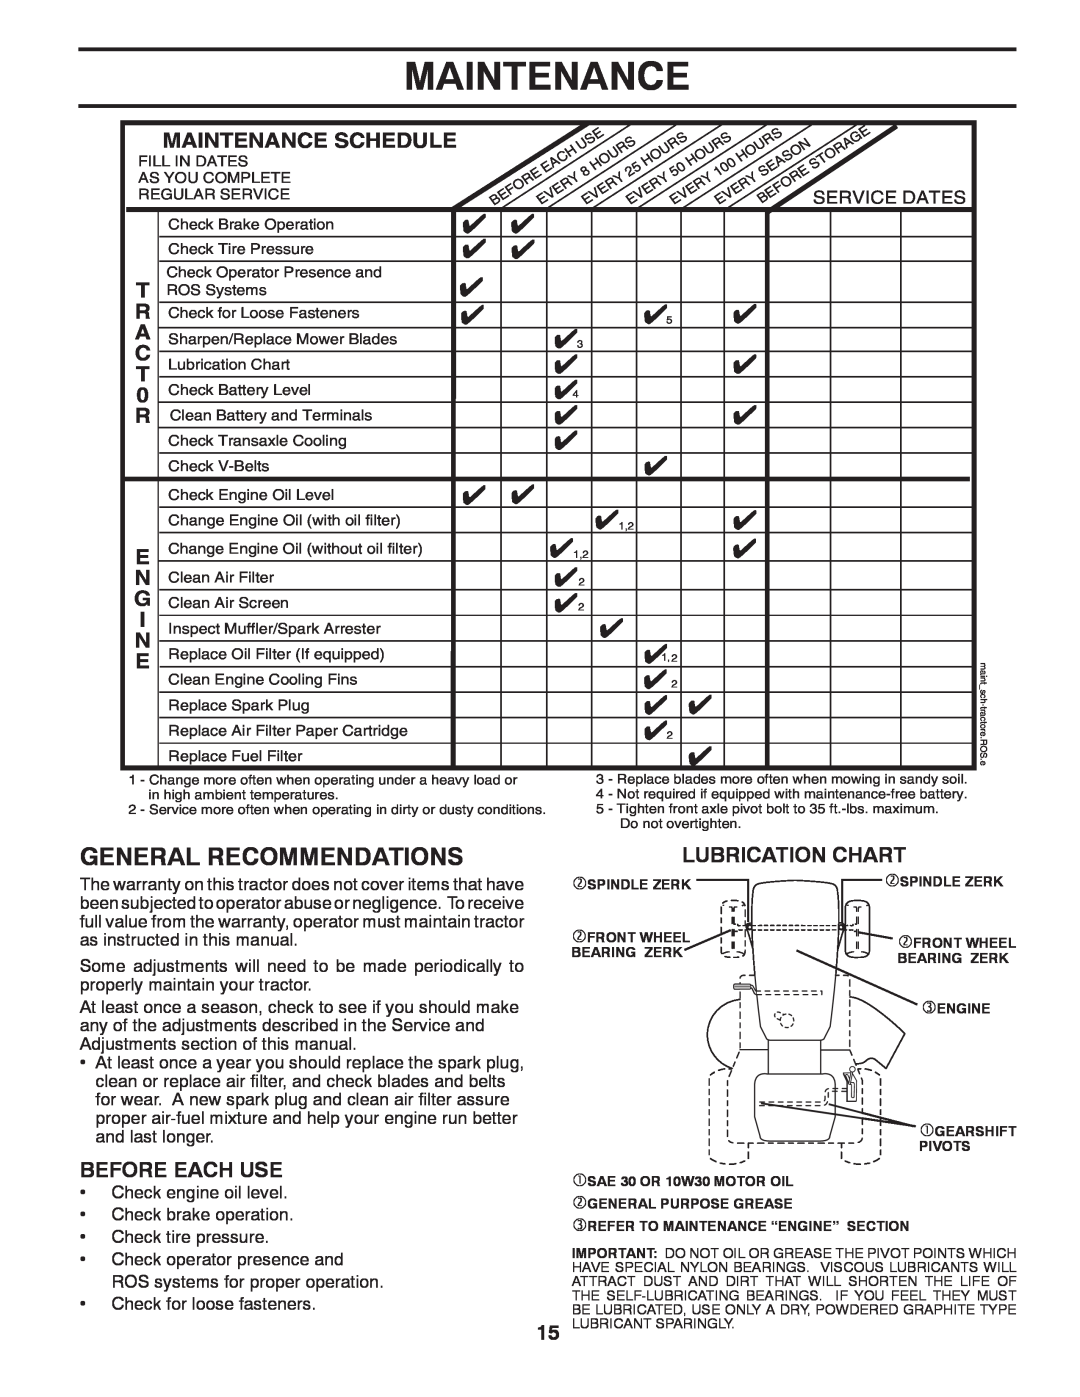 Poulan 96012006904 General Recommendations, Maintenance Schedule, Before Each Use, Lubrication Chart, Service Dates 